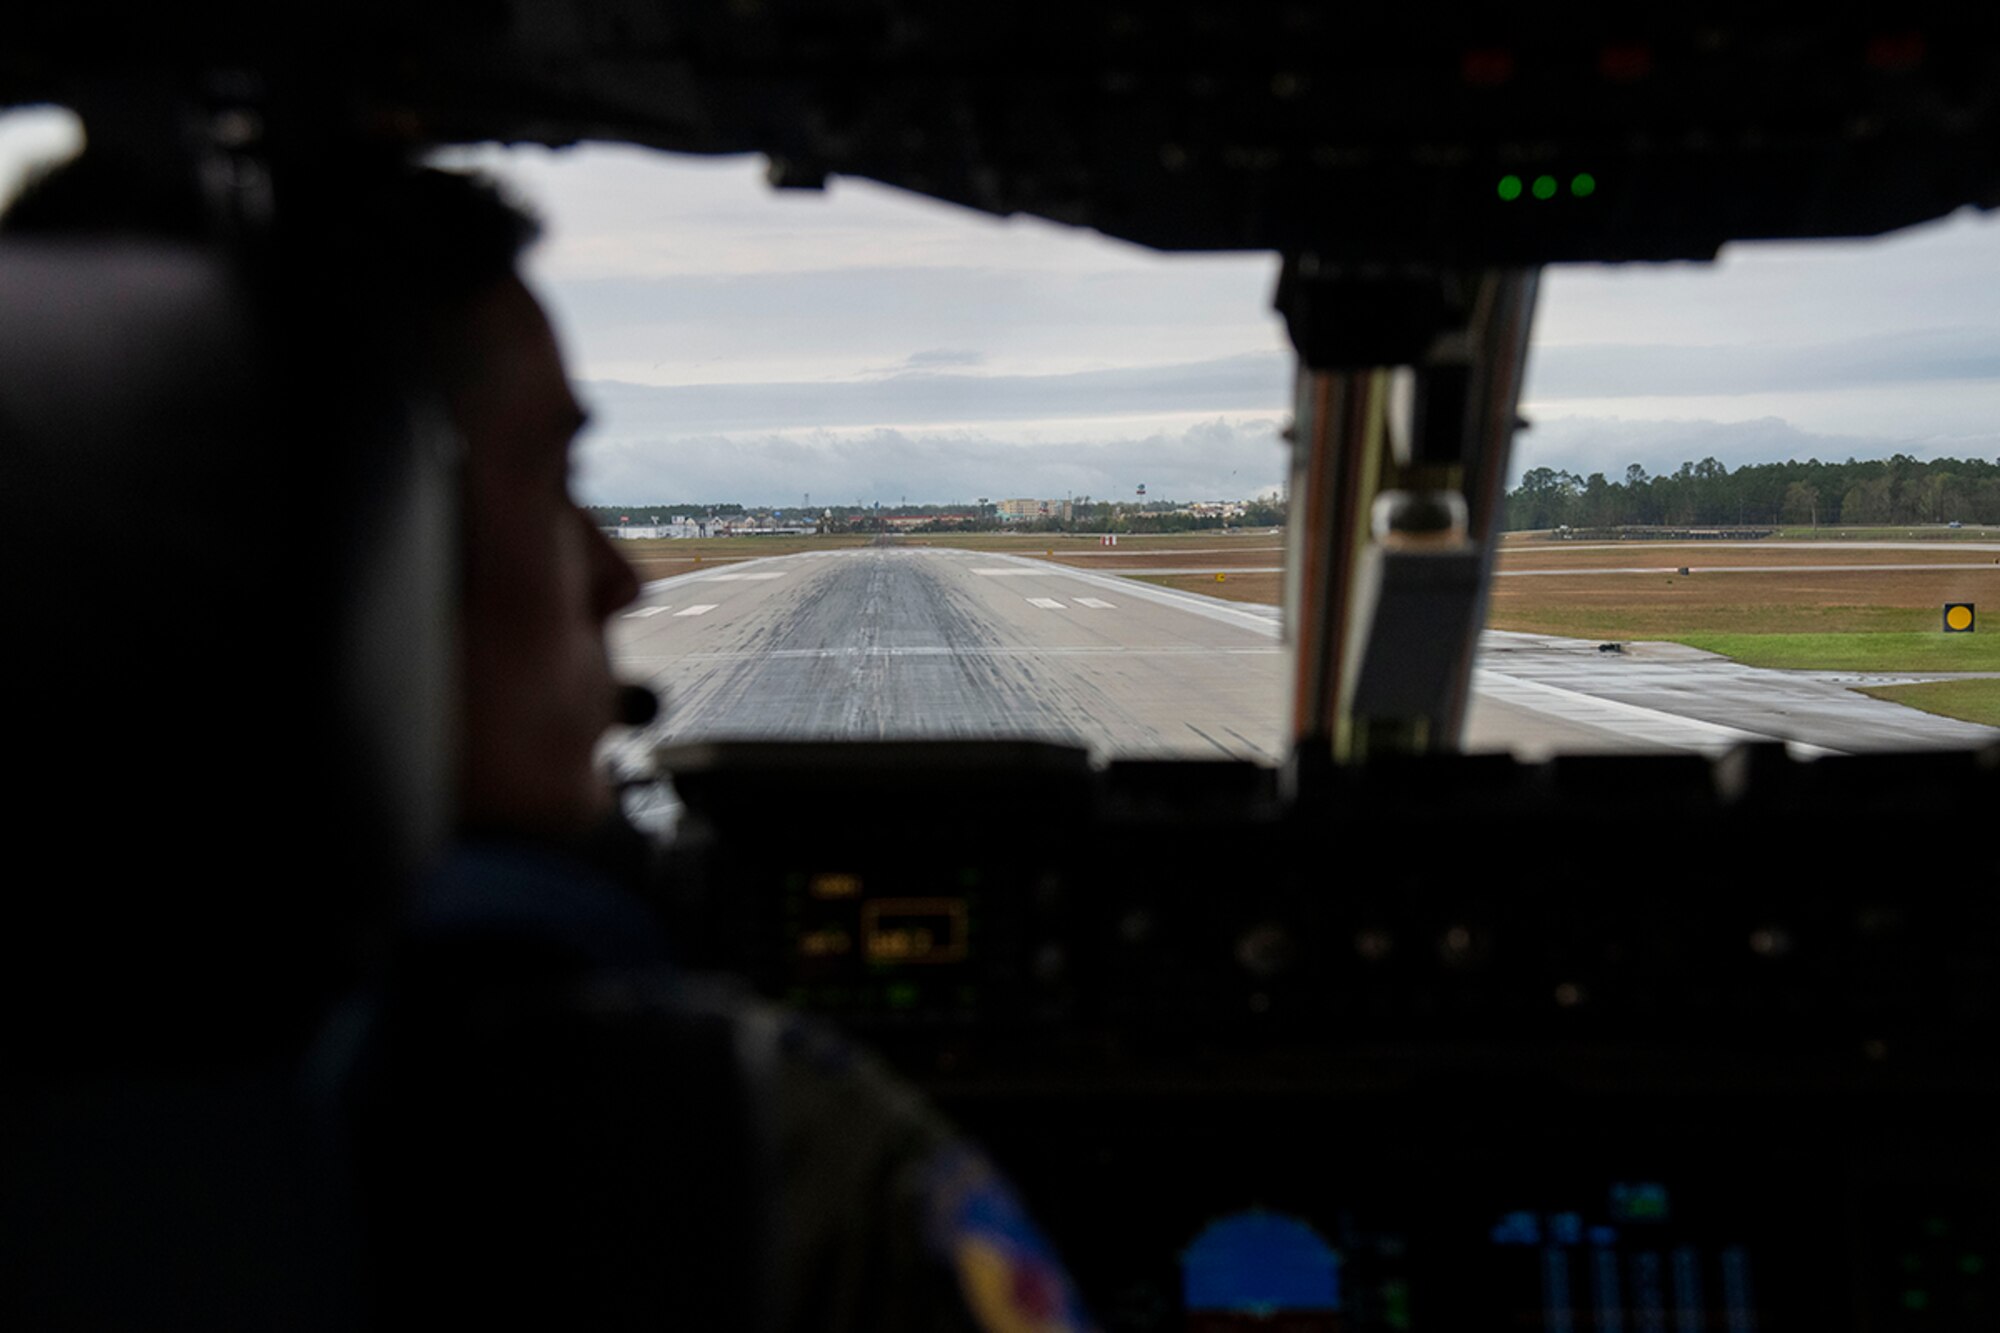 A C-17 Globemaster III from the 3rd Airlift Squadron at Dover Air Force Base, Del., taxies on the runway prior to takeoff as part of Exercise Jersey Devil 19 March 3, 2019. Jersey Devil is the largest joint base mobility exercise since 2009 with six units including both active duty and reserve Airmen. (U.S. Air Force photo by Airman 1st Class Zoe M. Wockenfuss)